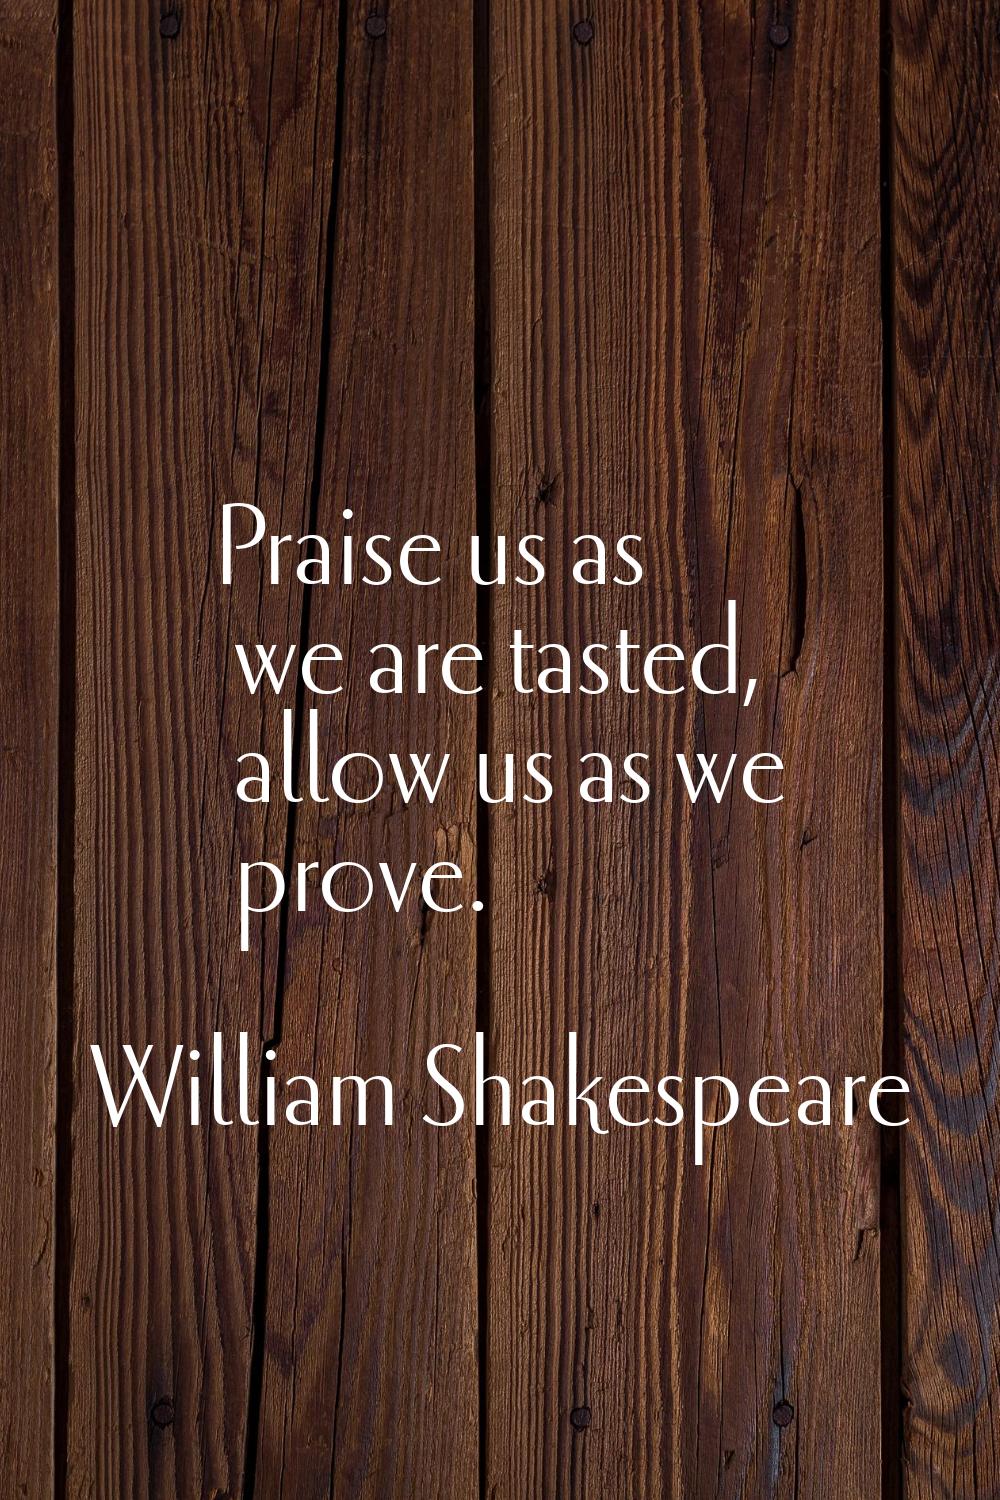 Praise us as we are tasted, allow us as we prove.